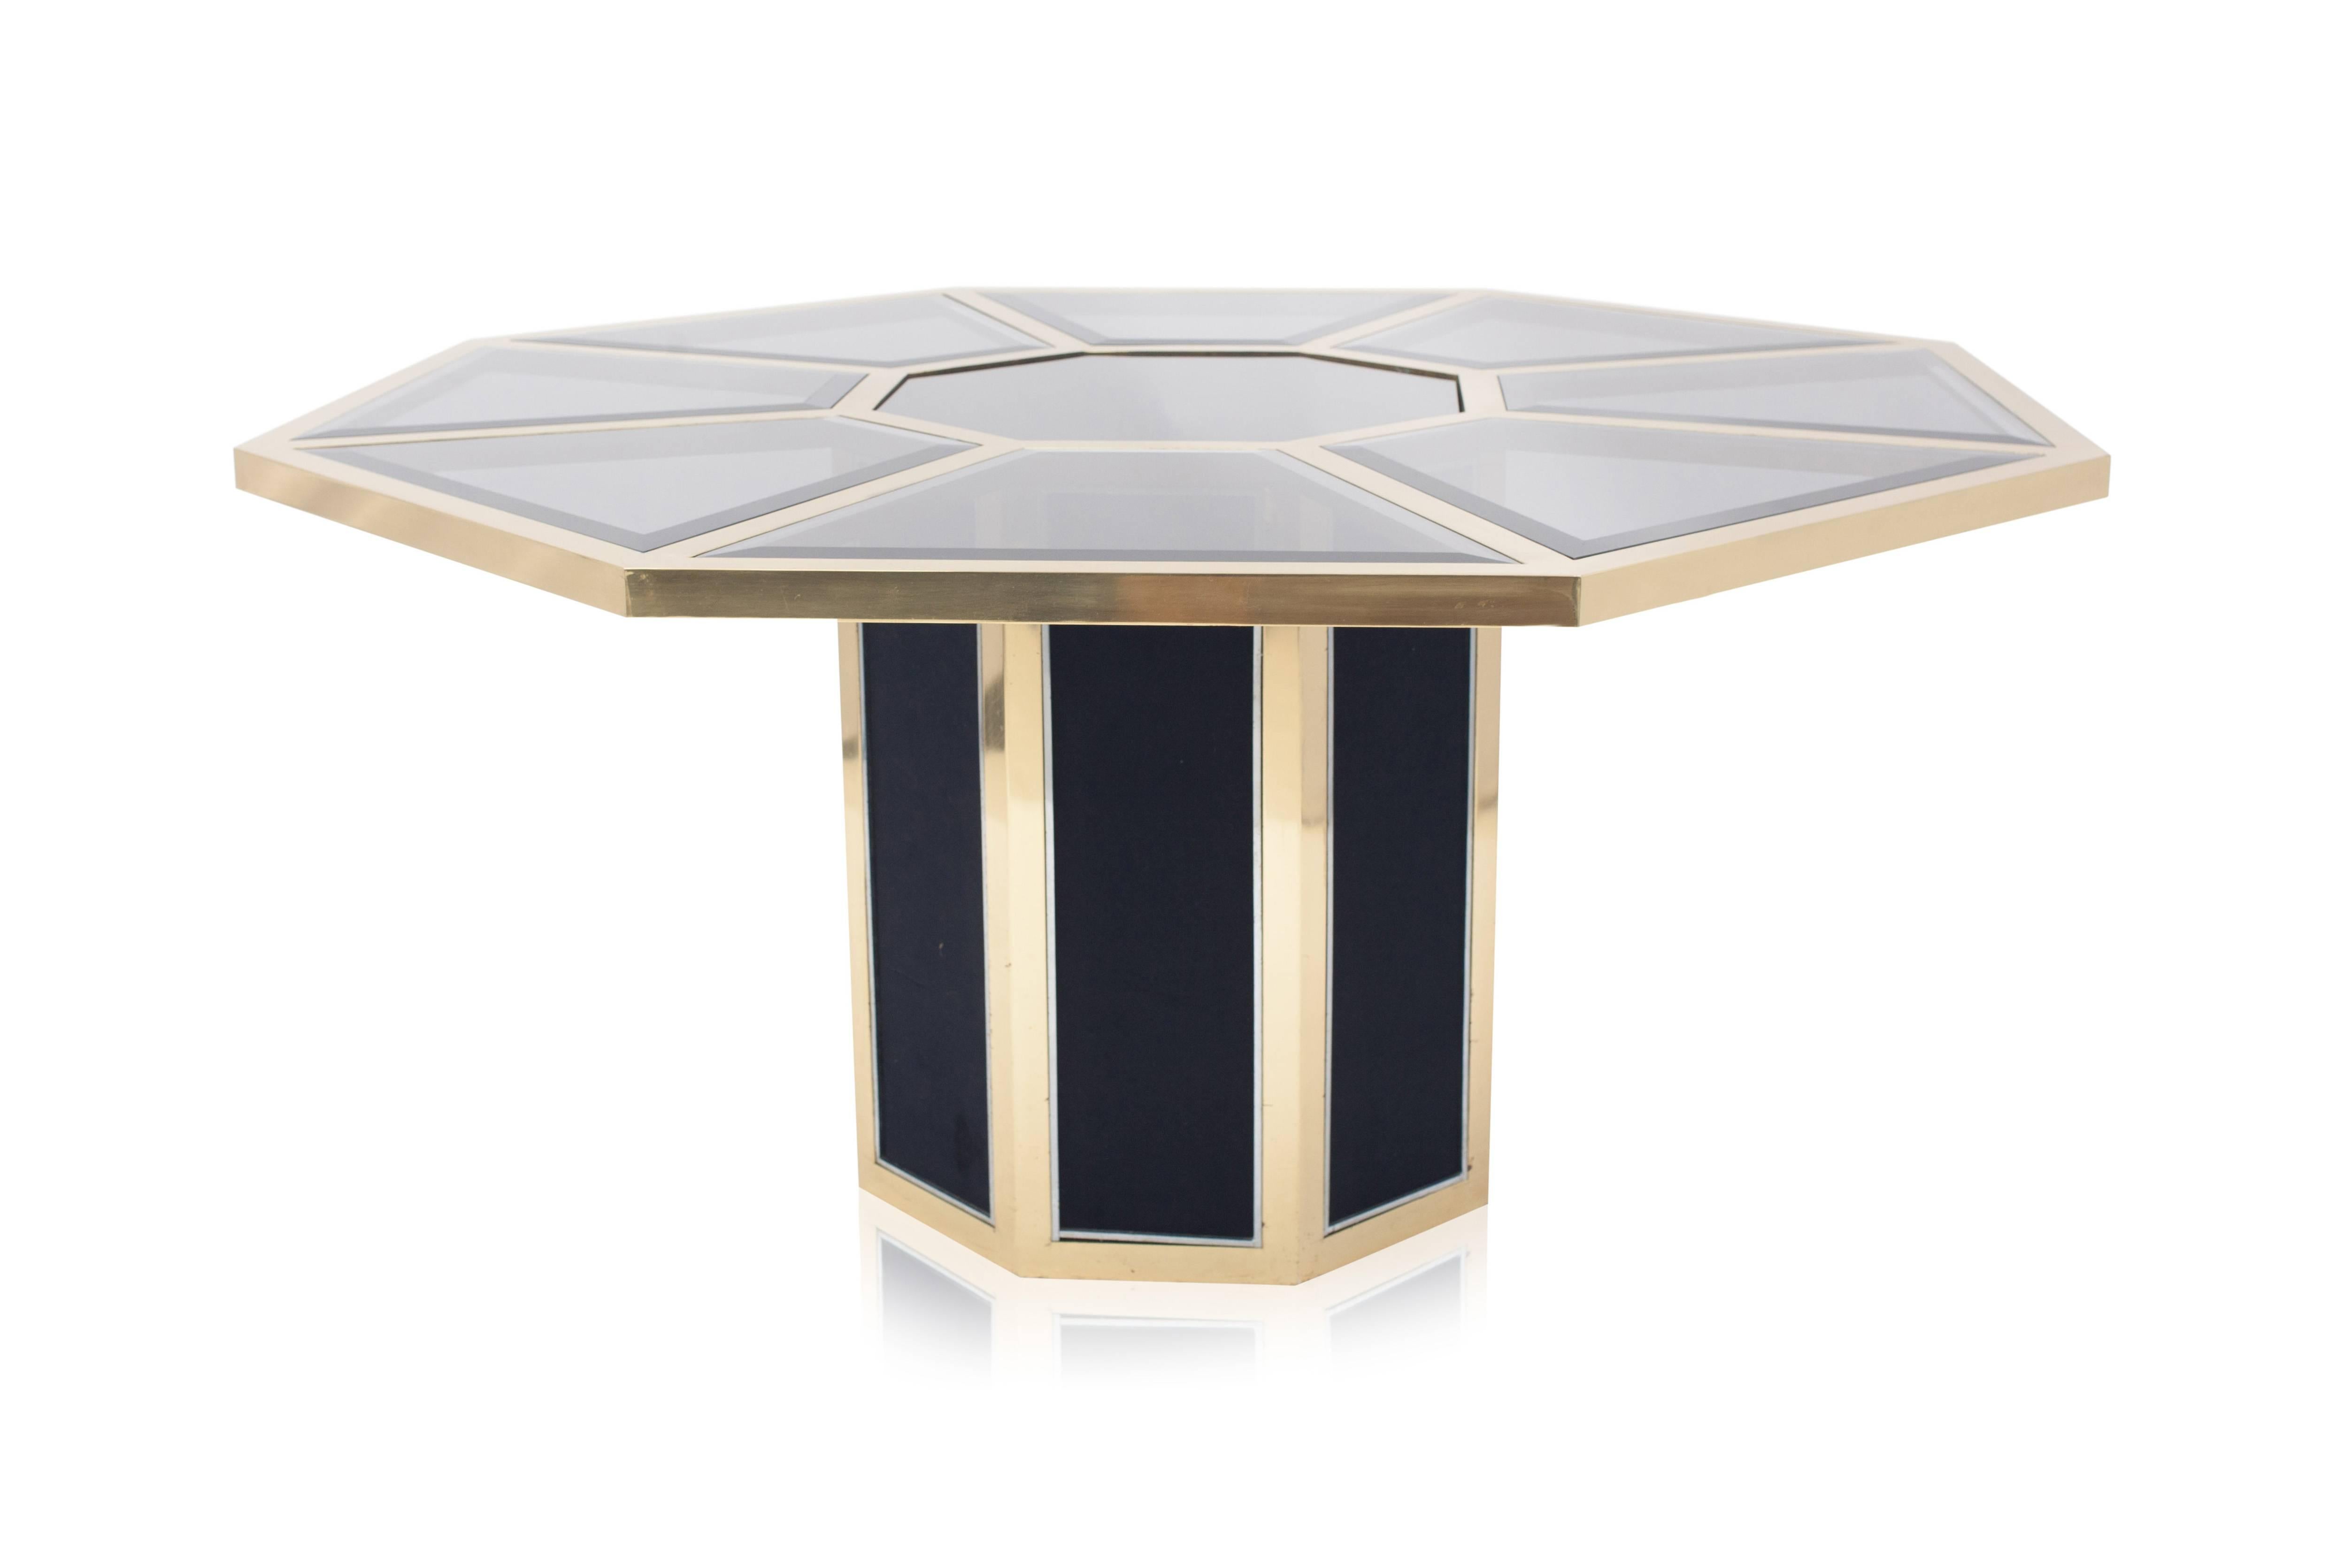 Brass octagonal dining table manufactured by Roche Bobois
In the Italian glam style of Gabriella Crespi.

Chromed steel. black velvet covered panels. purple faceted glass, 

France, 1970s

Seats eight persons
Measures: Ø 163 cm H 73